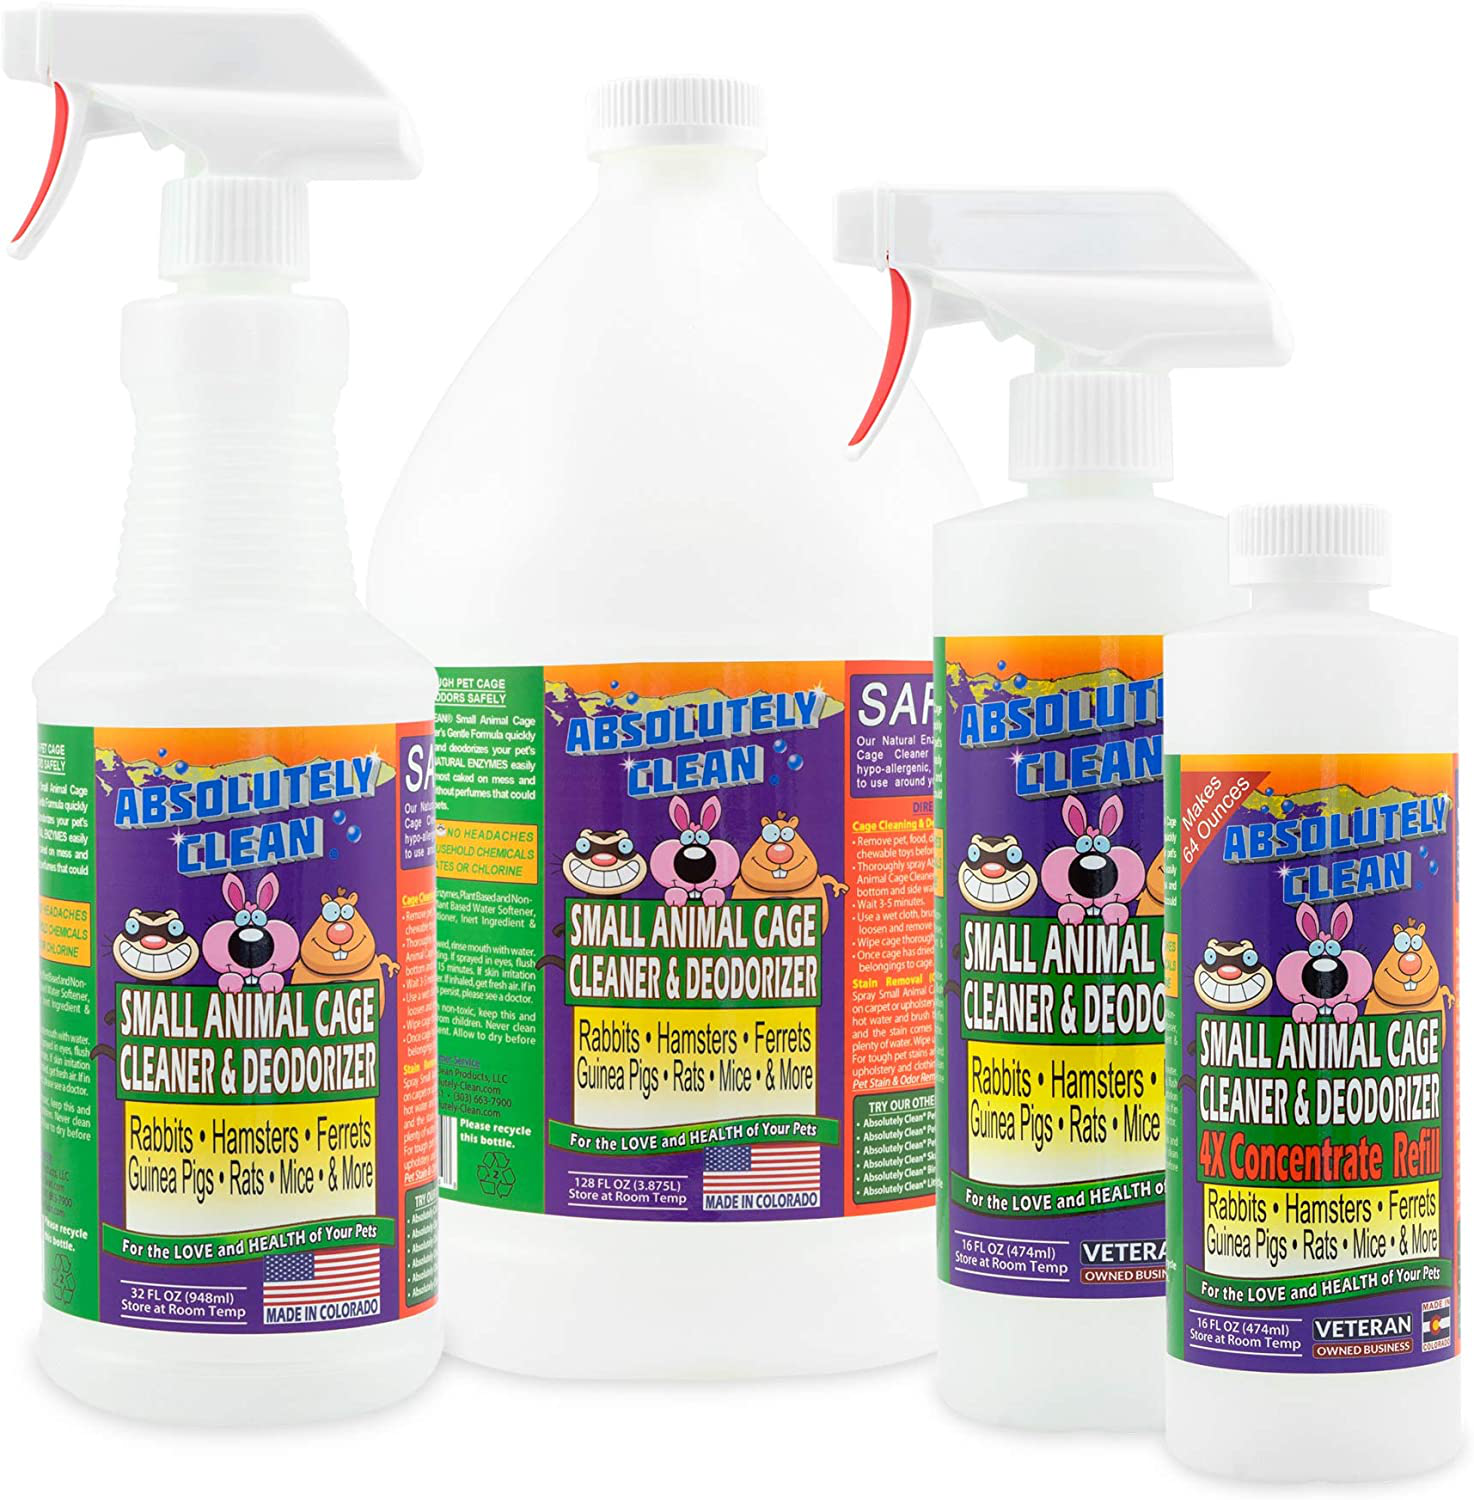 Amazing Small Animal Cage Cleaner - Just Spray/Wipe - Easily Removes Messes & Odors - Hamsters, Mice, Rats, Guinea Pigs, Ferrets - USA Made Animals & Pet Supplies > Pet Supplies > Small Animal Supplies > Small Animal Habitats & Cages Absolutely Clean   